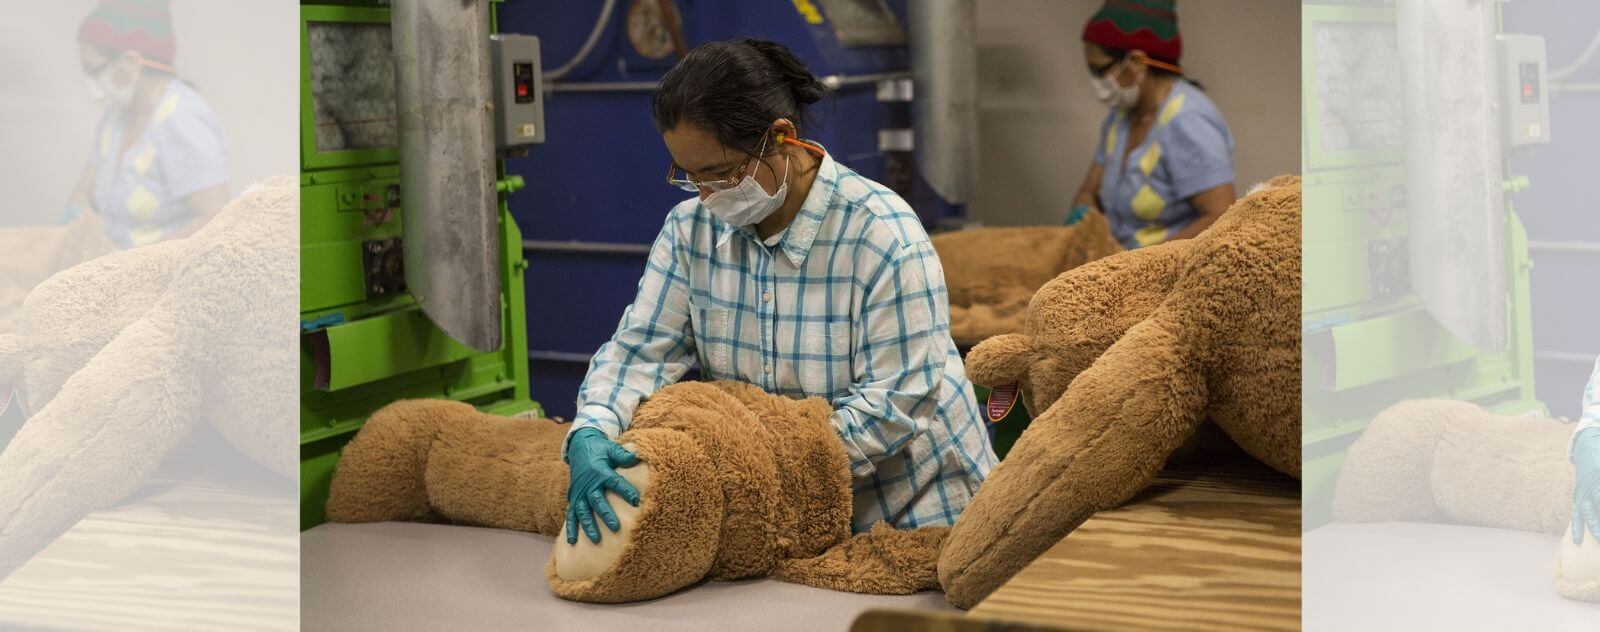 Manufacture of stuffed animals